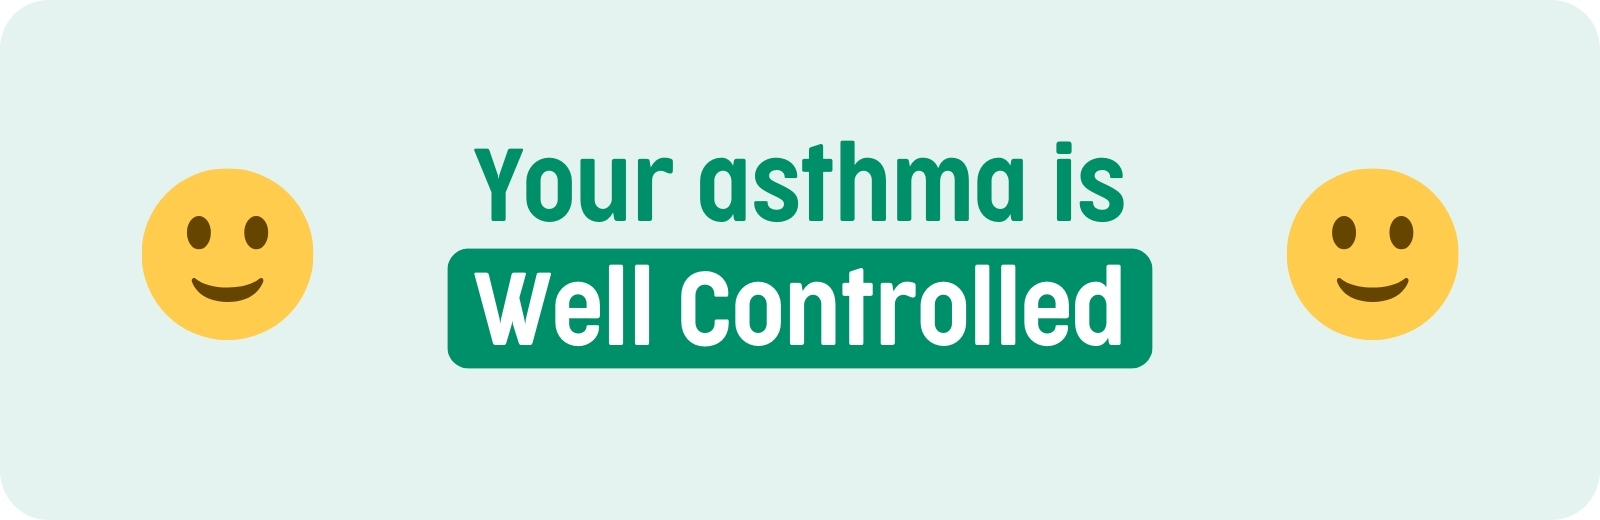 Asthma Control Questionaire, Well Controlled Asthma